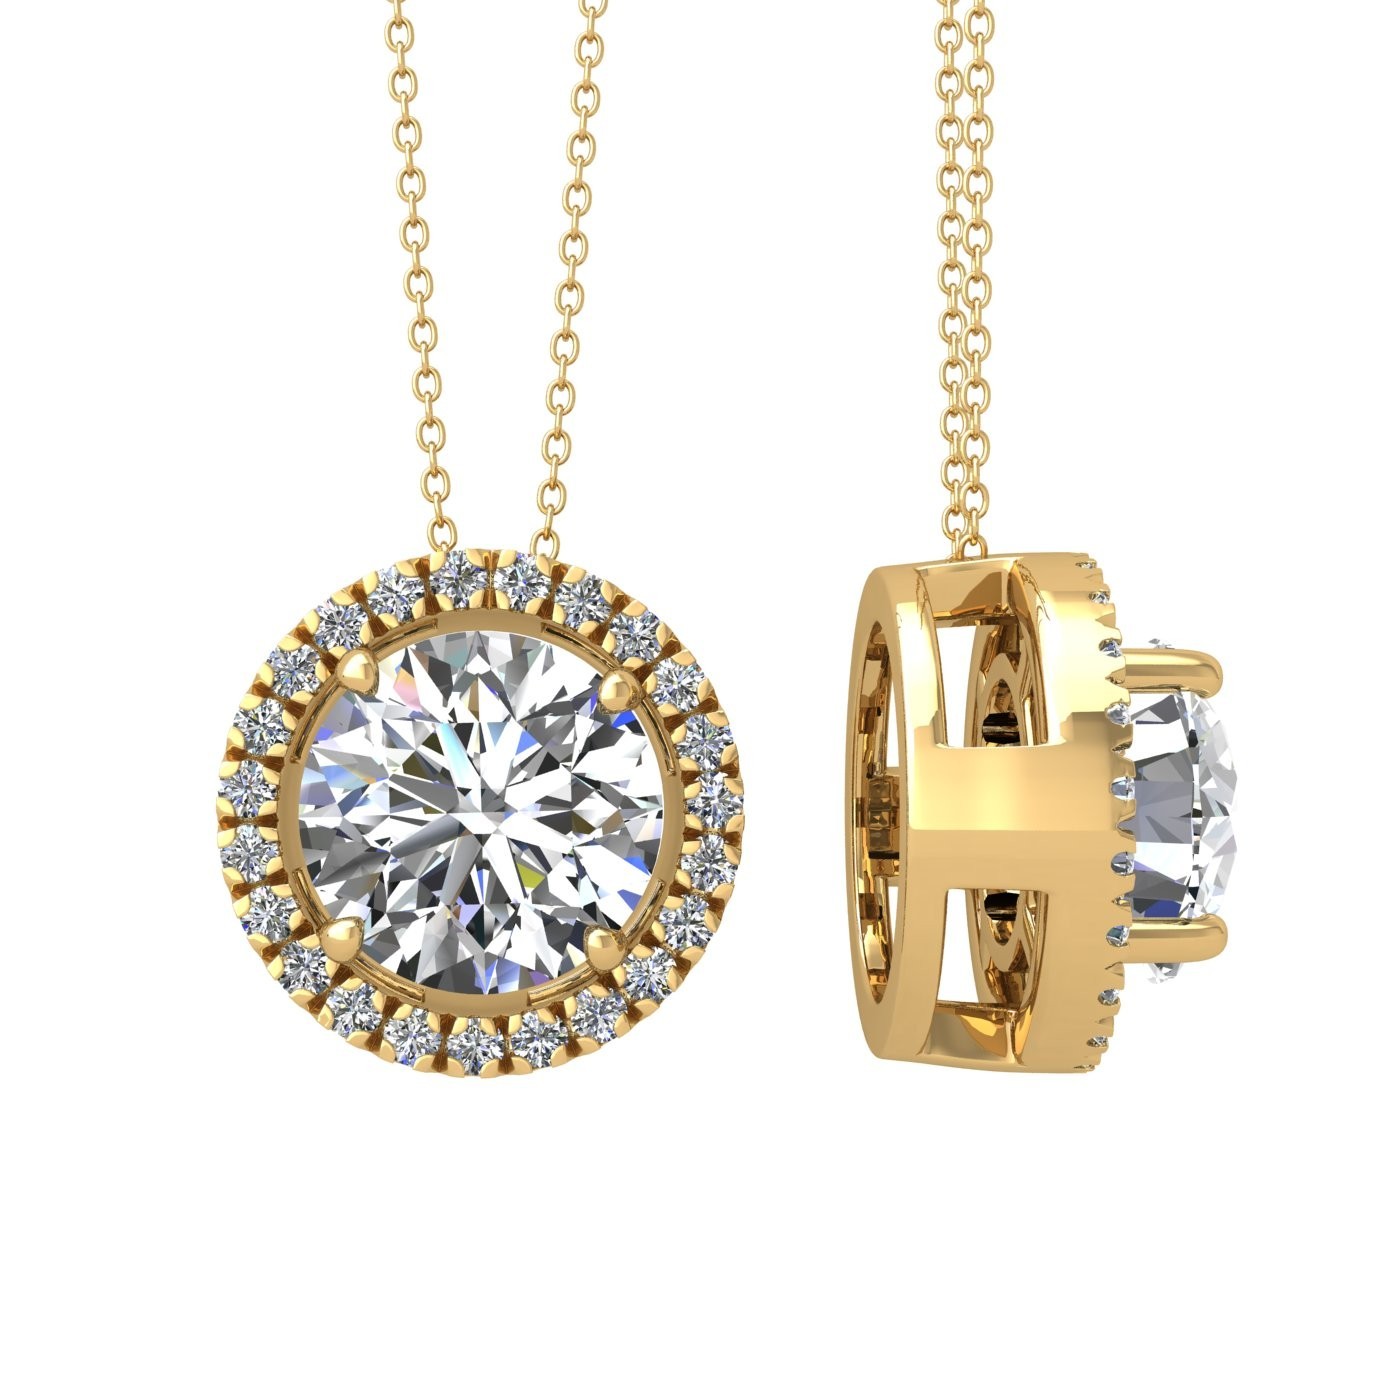 18k yellow gold 1 ct 4 prong round shape diamond pendant with diamond pavÉ set halo including chain seperate from the pendant